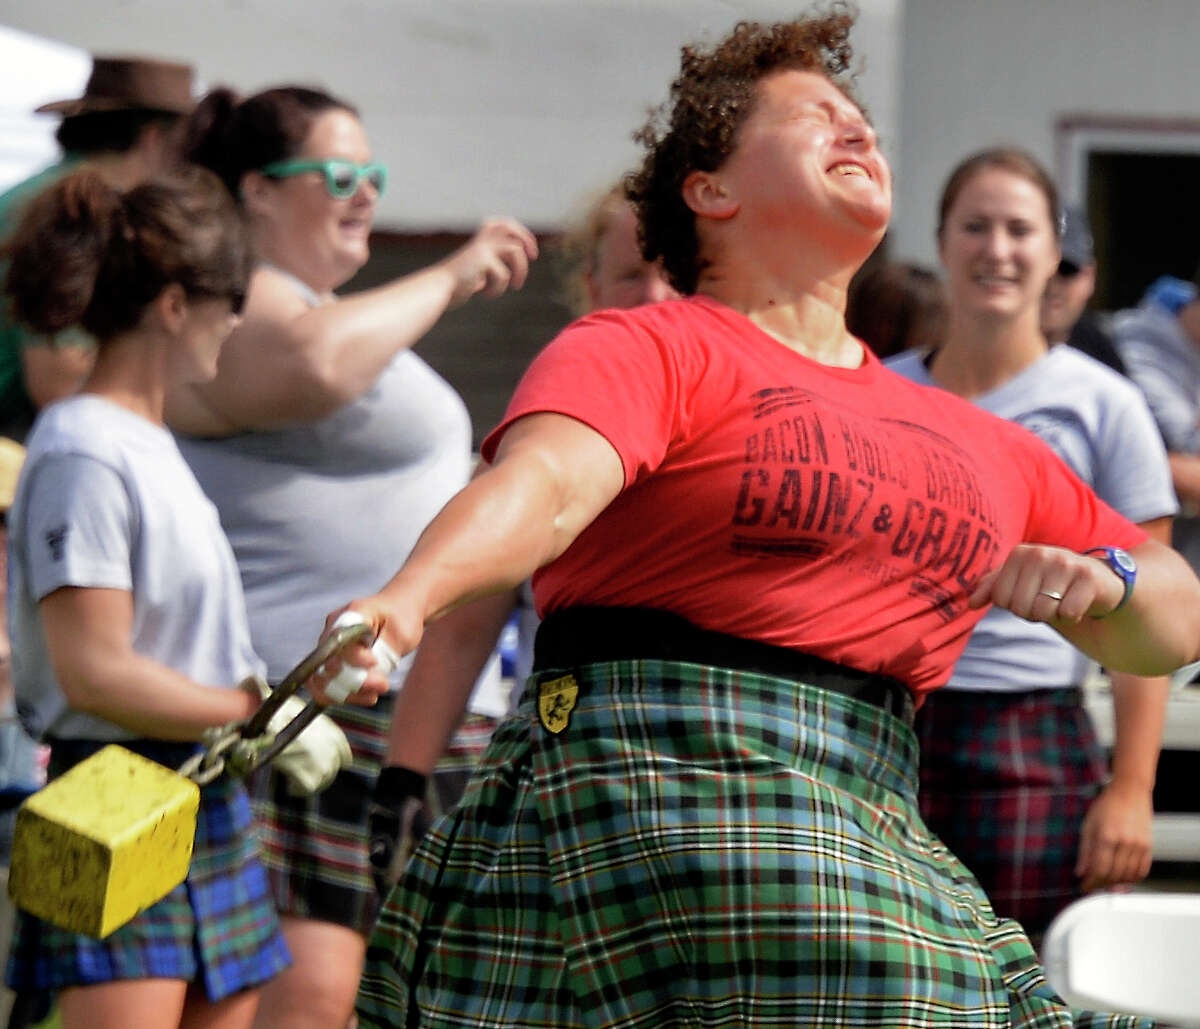 Altamont native now living in Ohio, Janine Tessarzik Kuestner competes in the women's heavy weight for distance competition at the Scottish Games Saturday Sept. 1, 2018 in Altamont, NY. (John Carl D'Annibale/Times Union)